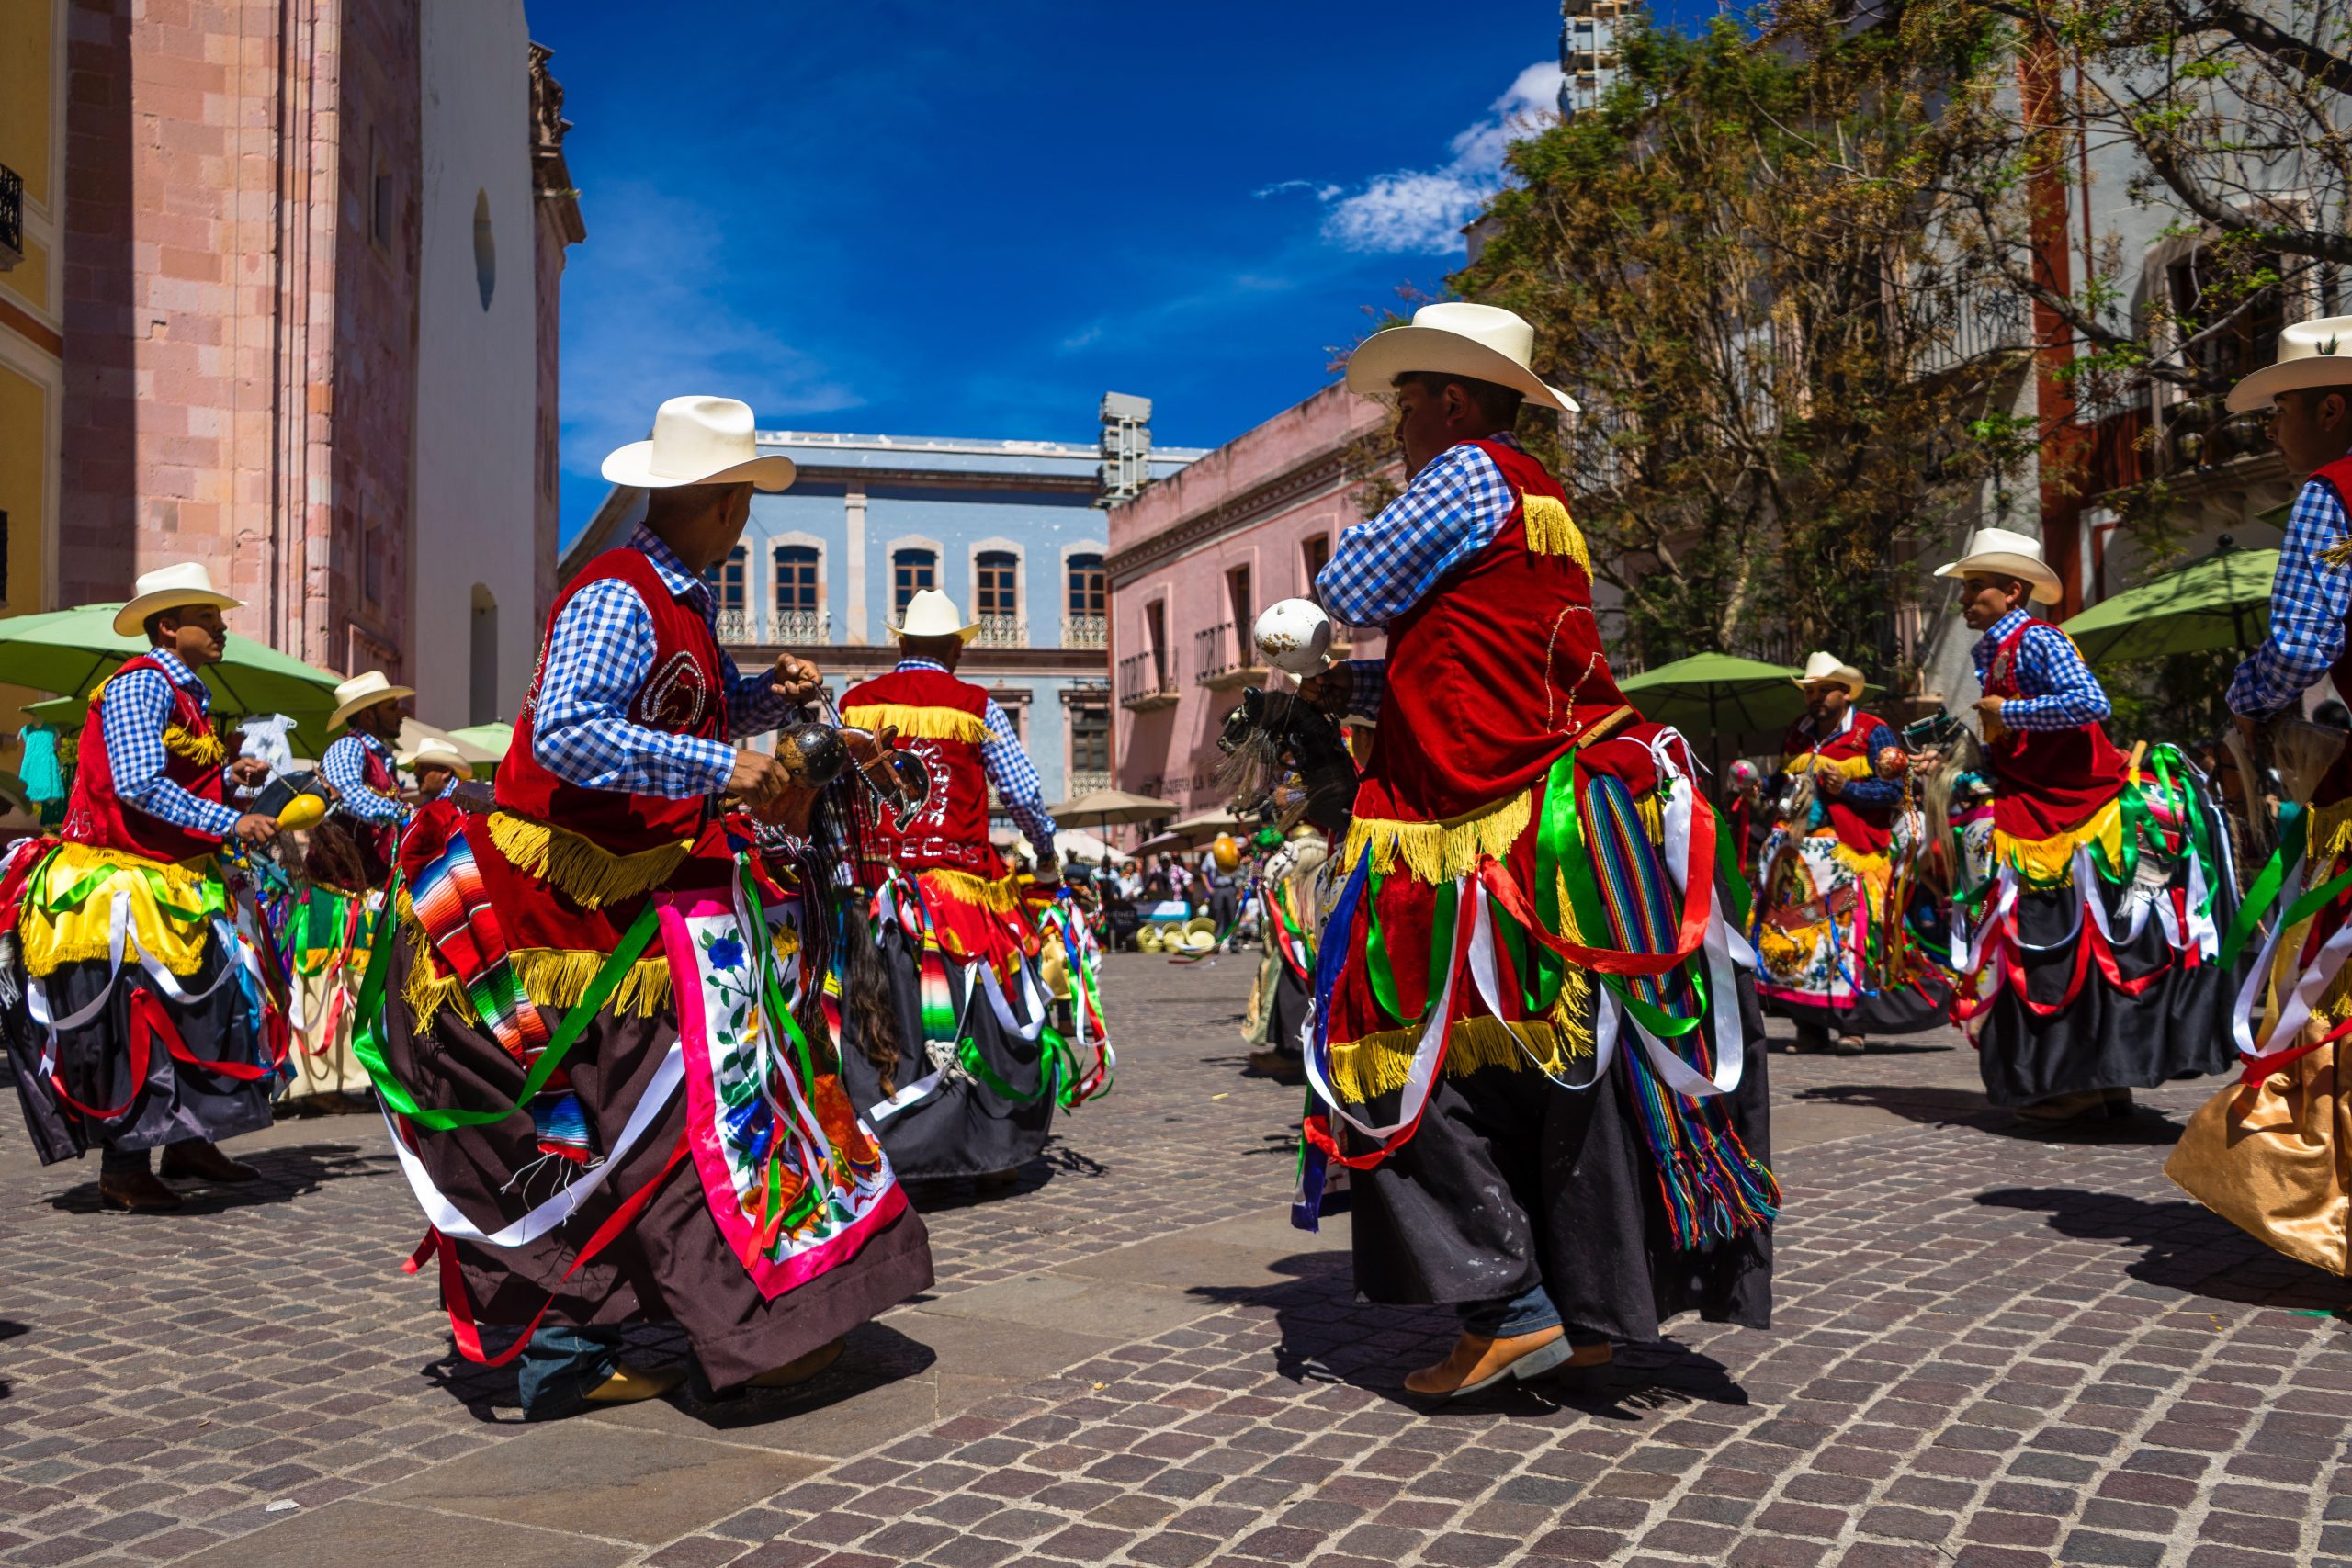 In an article about Fiestas Patronales, dancers perform a traditional Puerto Rican. dance on the street.